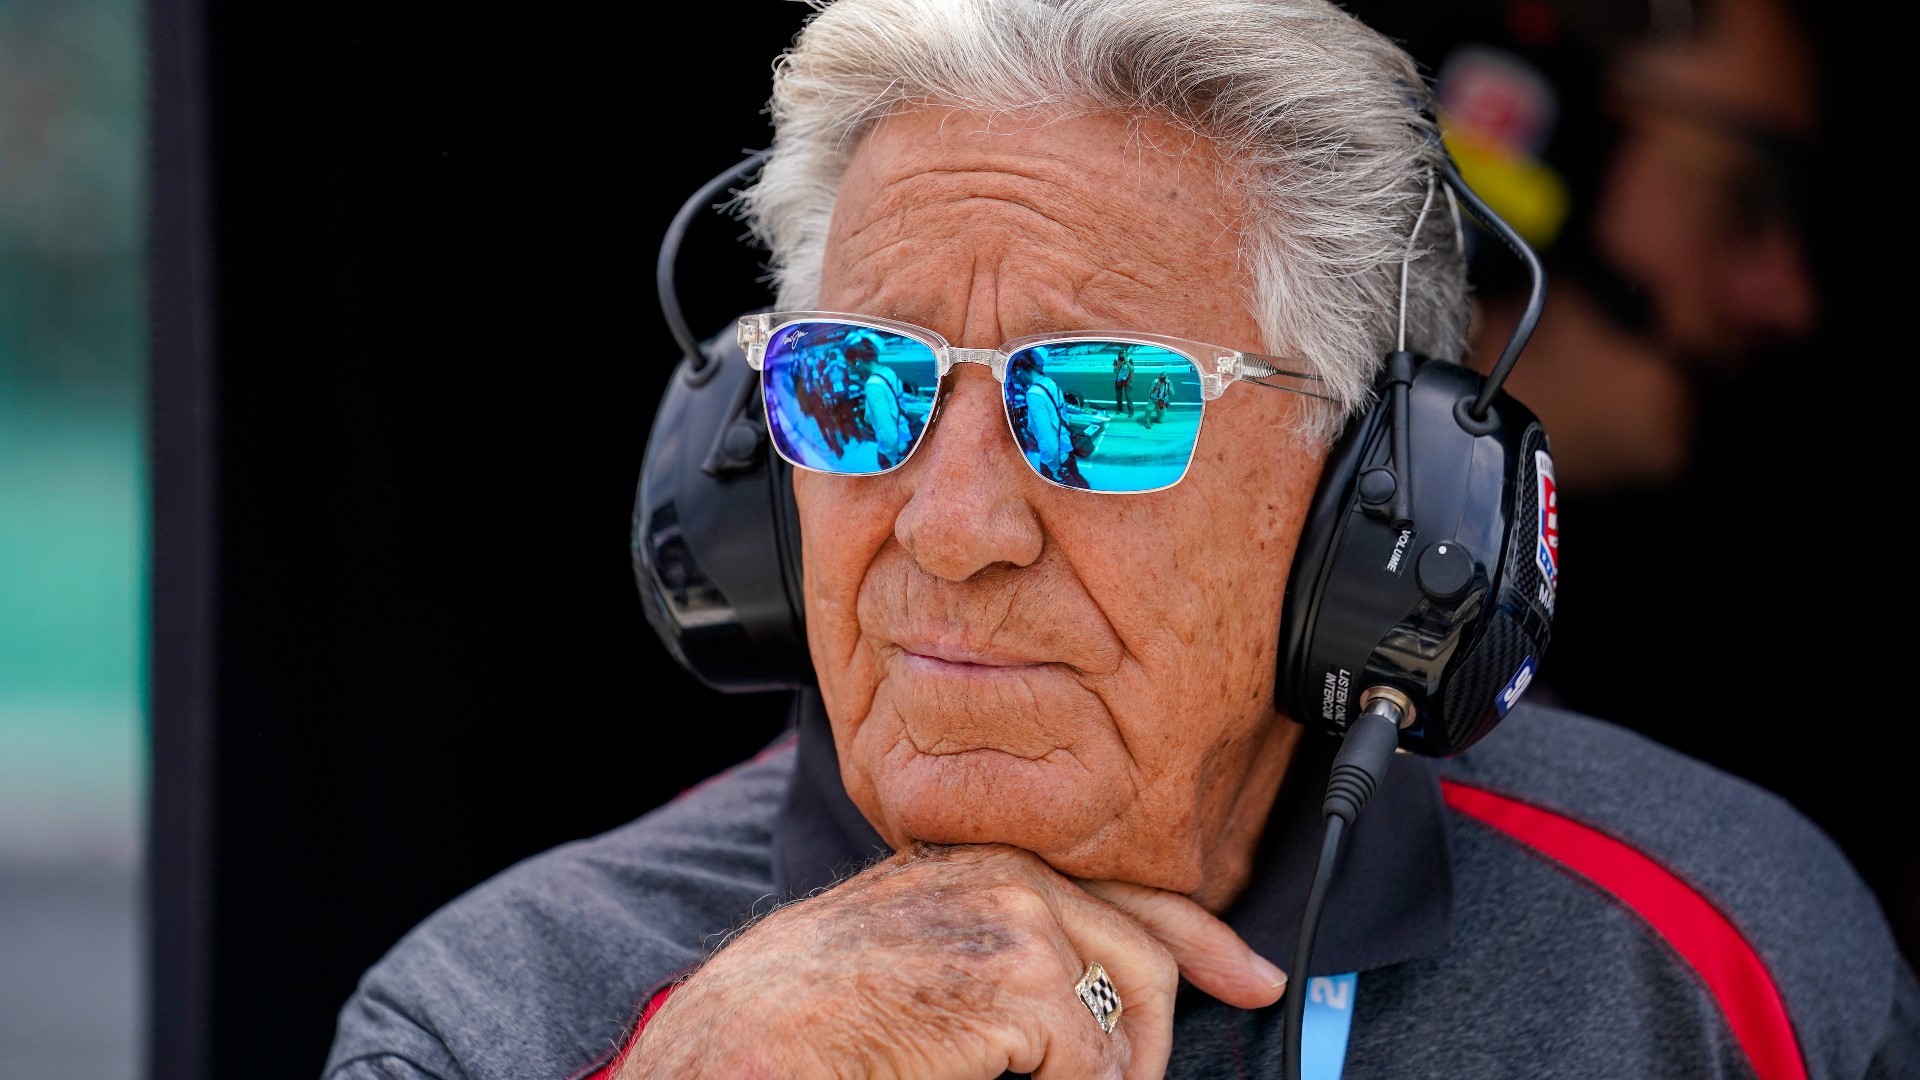 Mario Andretti offended by F1 rejection. | wkyc.com